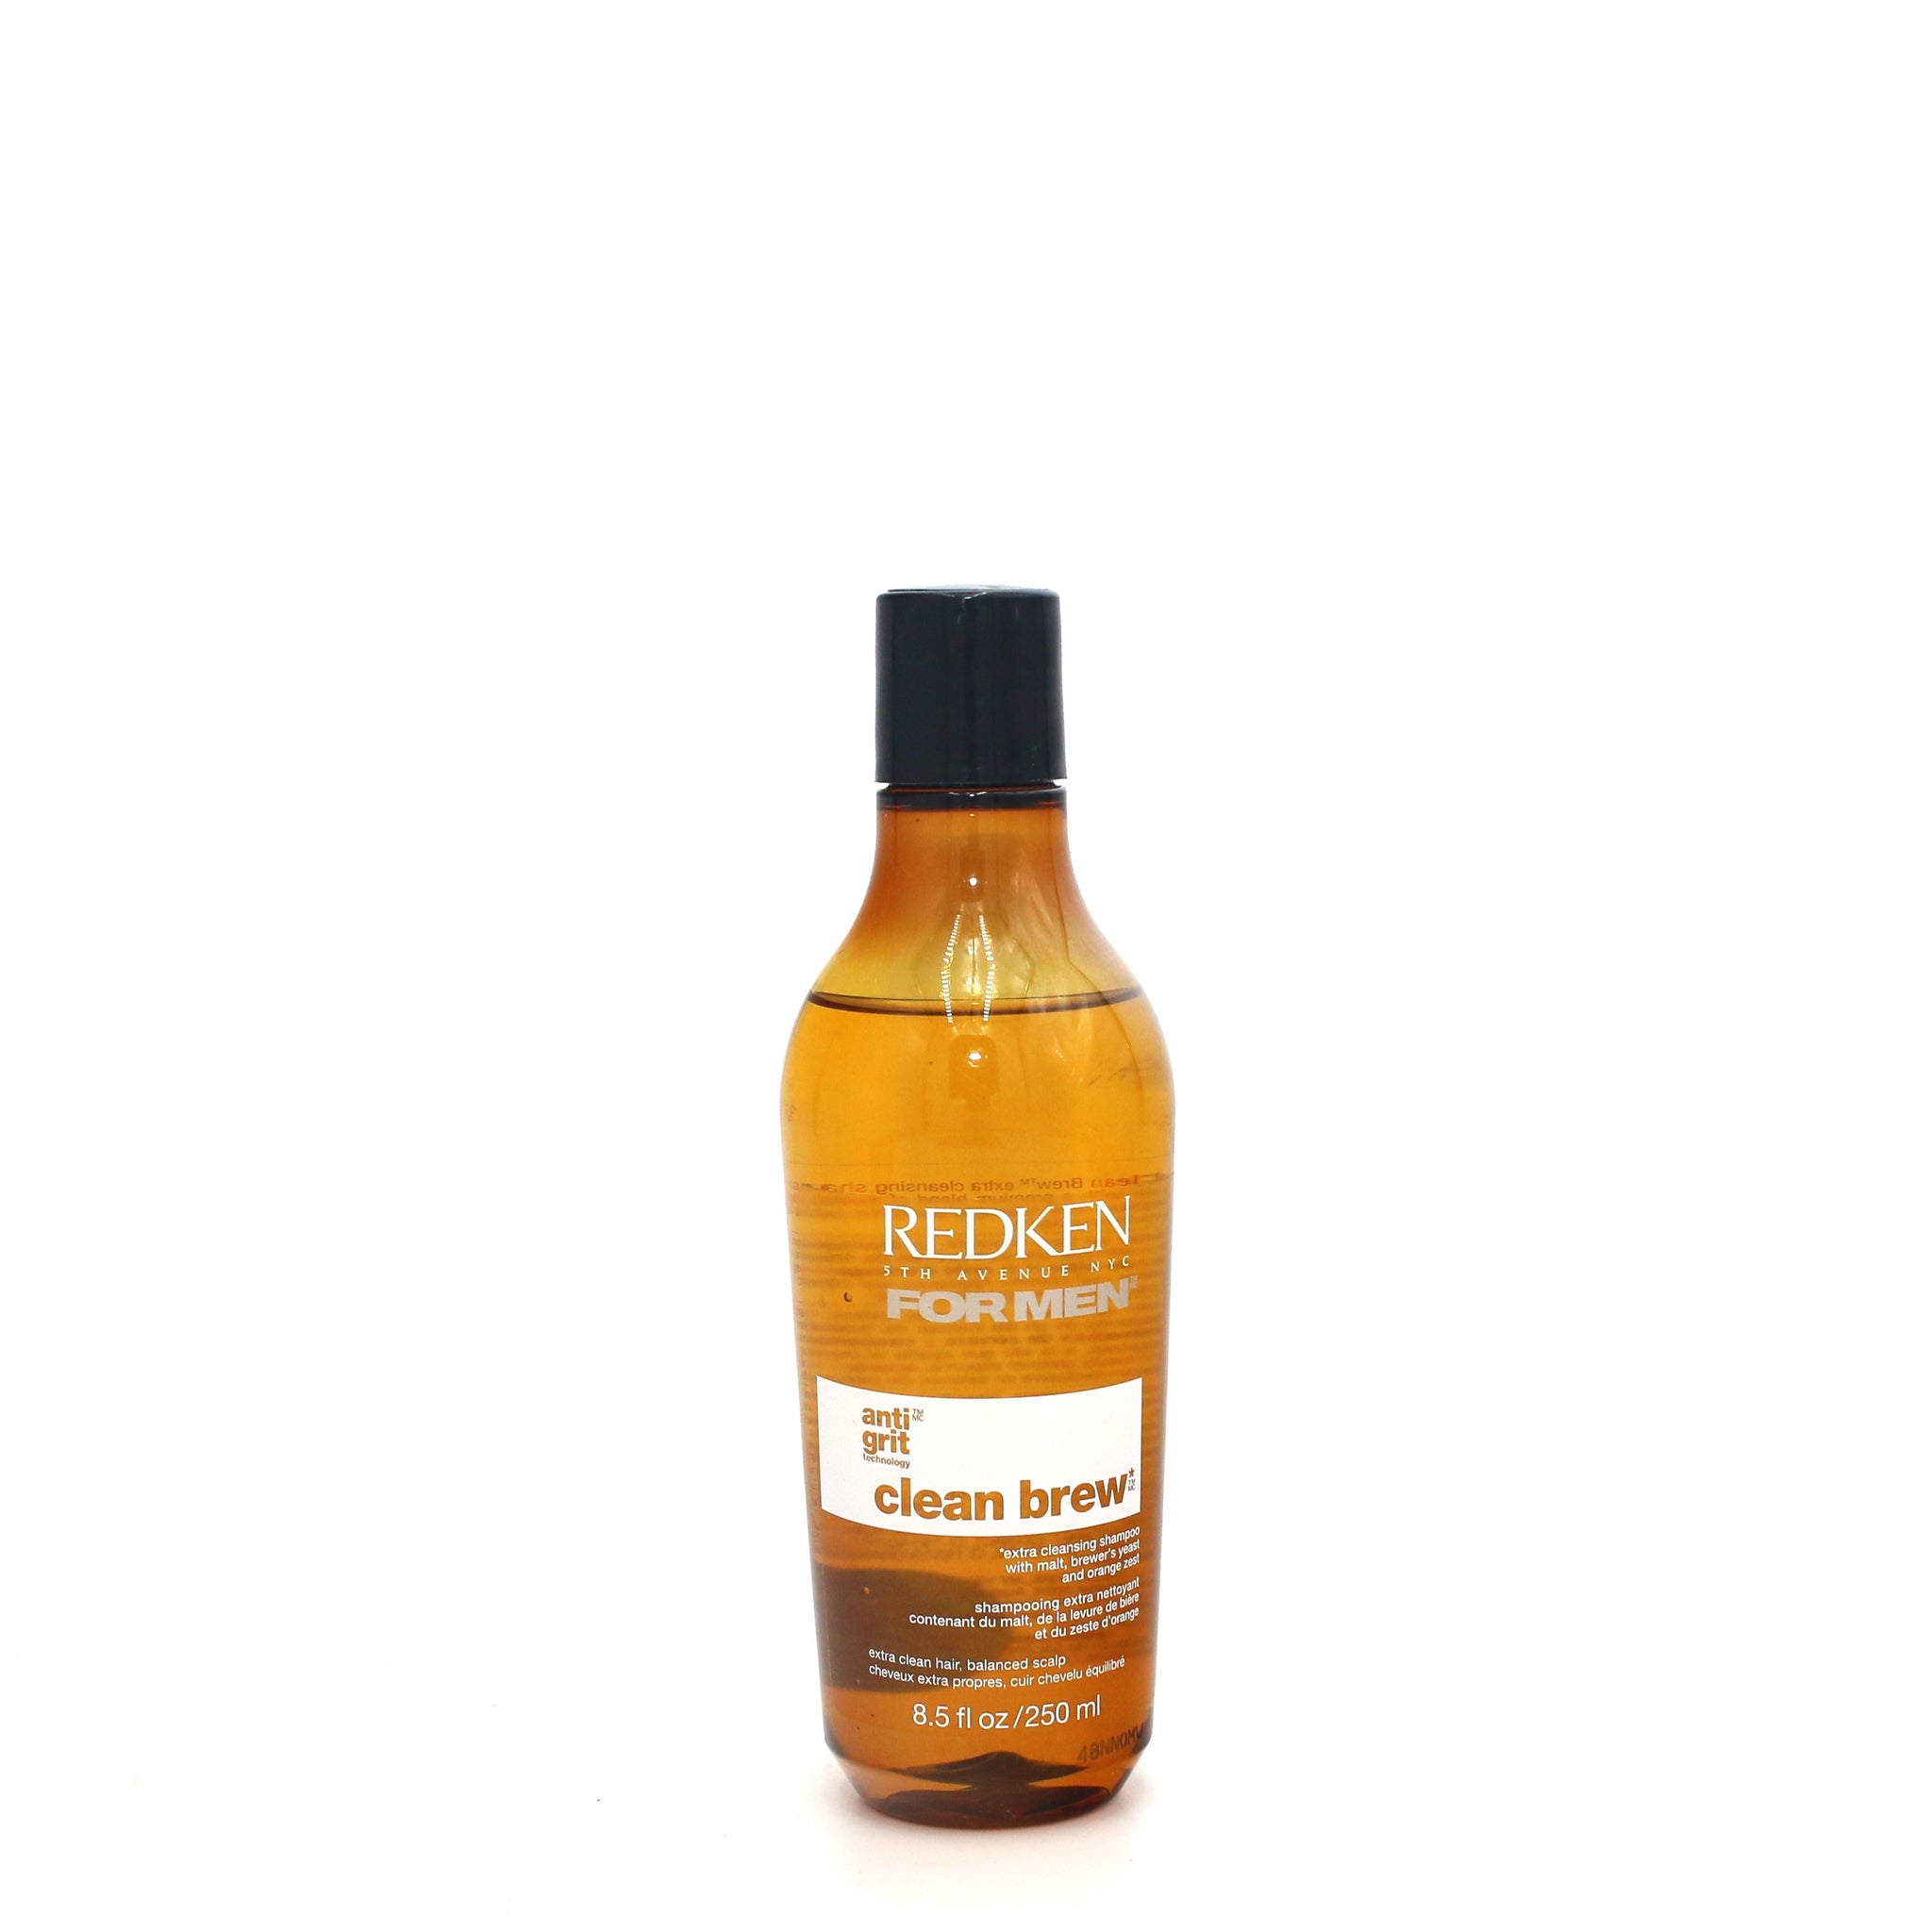 REDKEN Clean Brew Extra Cleansing Shampoo 8.5 oz